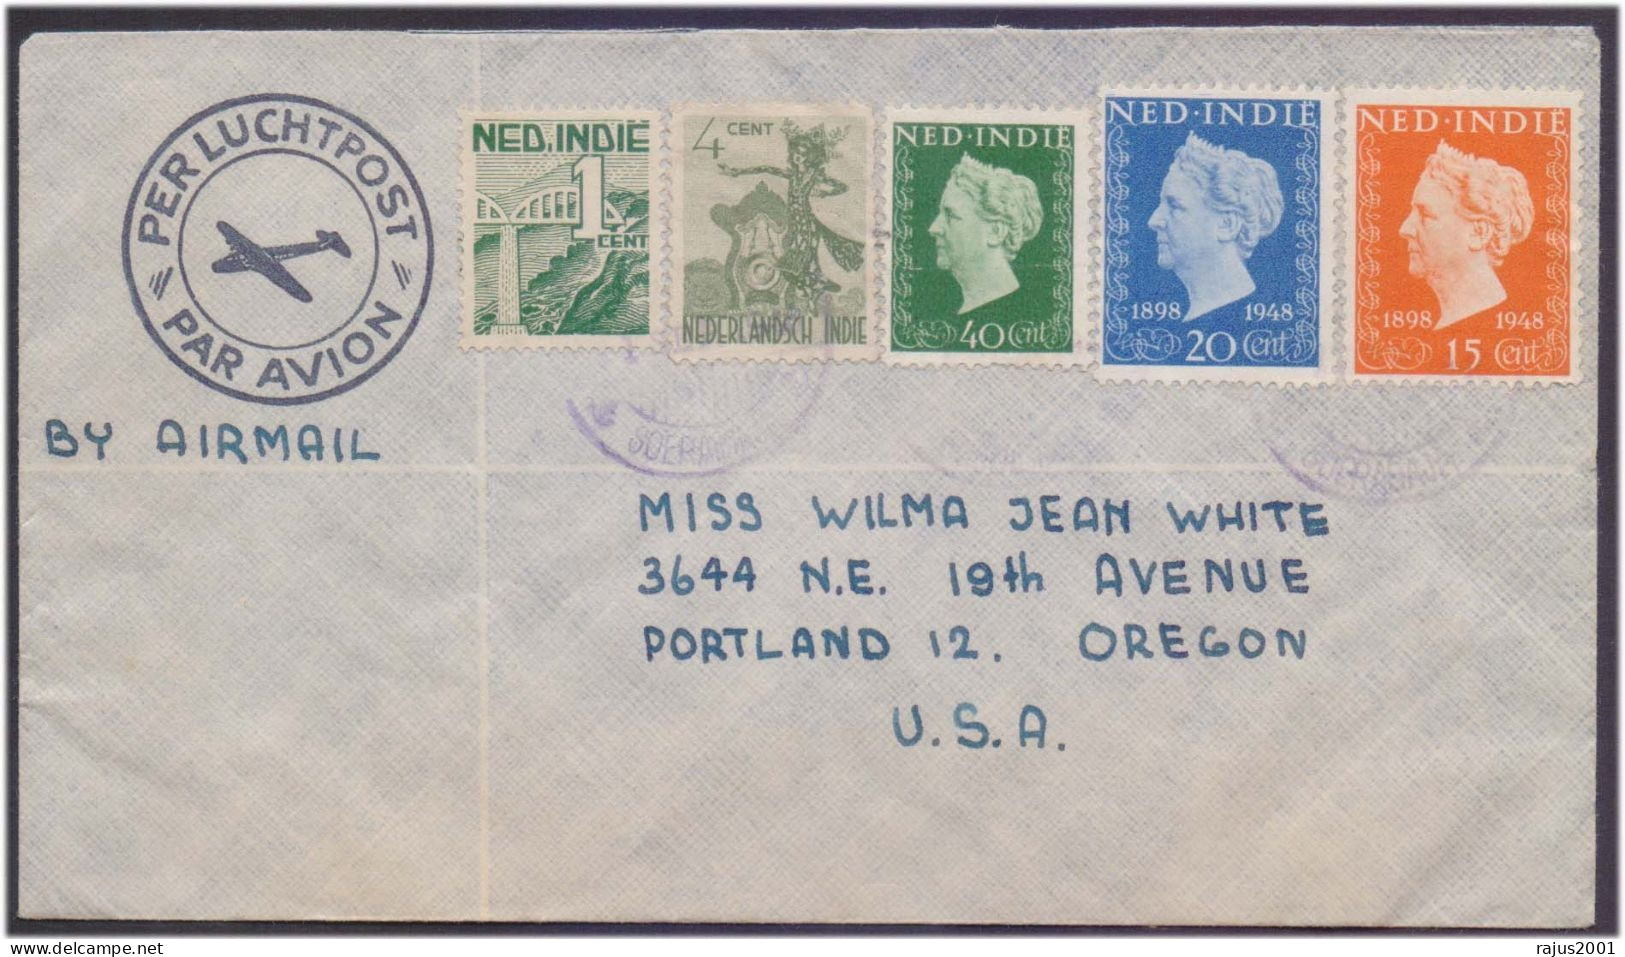 Queen Wilhelmina Of The Netherlands, Postal Stationery Netherlands Indies / India - NED INDIE Cover 1948 - Netherlands Indies